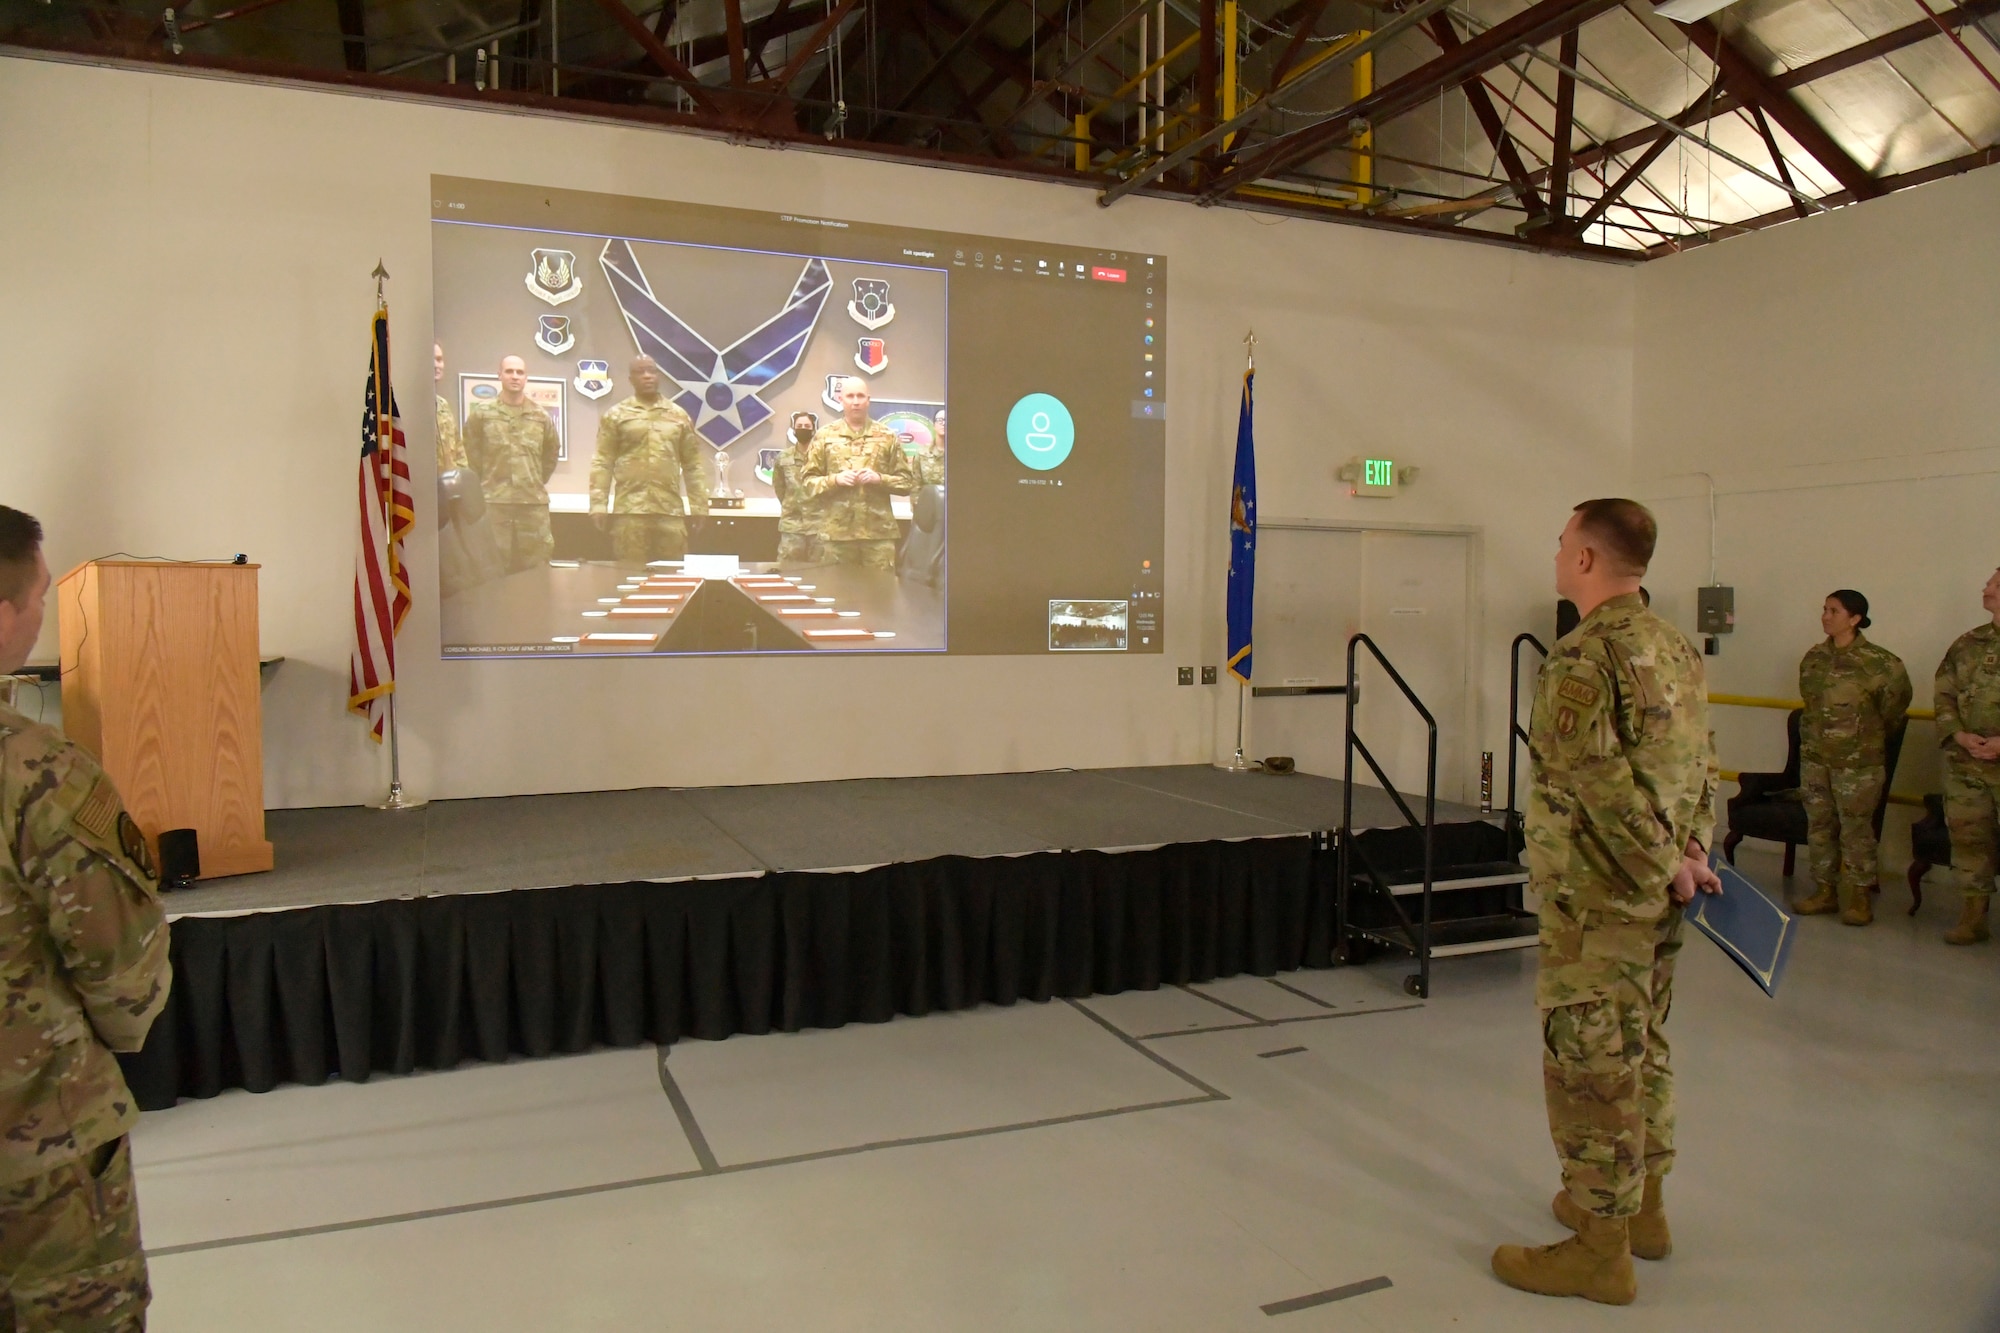 Technical Sgt. Alexander Merrill, 649th Munitions Squadron, stands in front of a screen where Air Force Sustainment Center Commander Lt. Gen. Stacey Hawkins appears congratuating him.